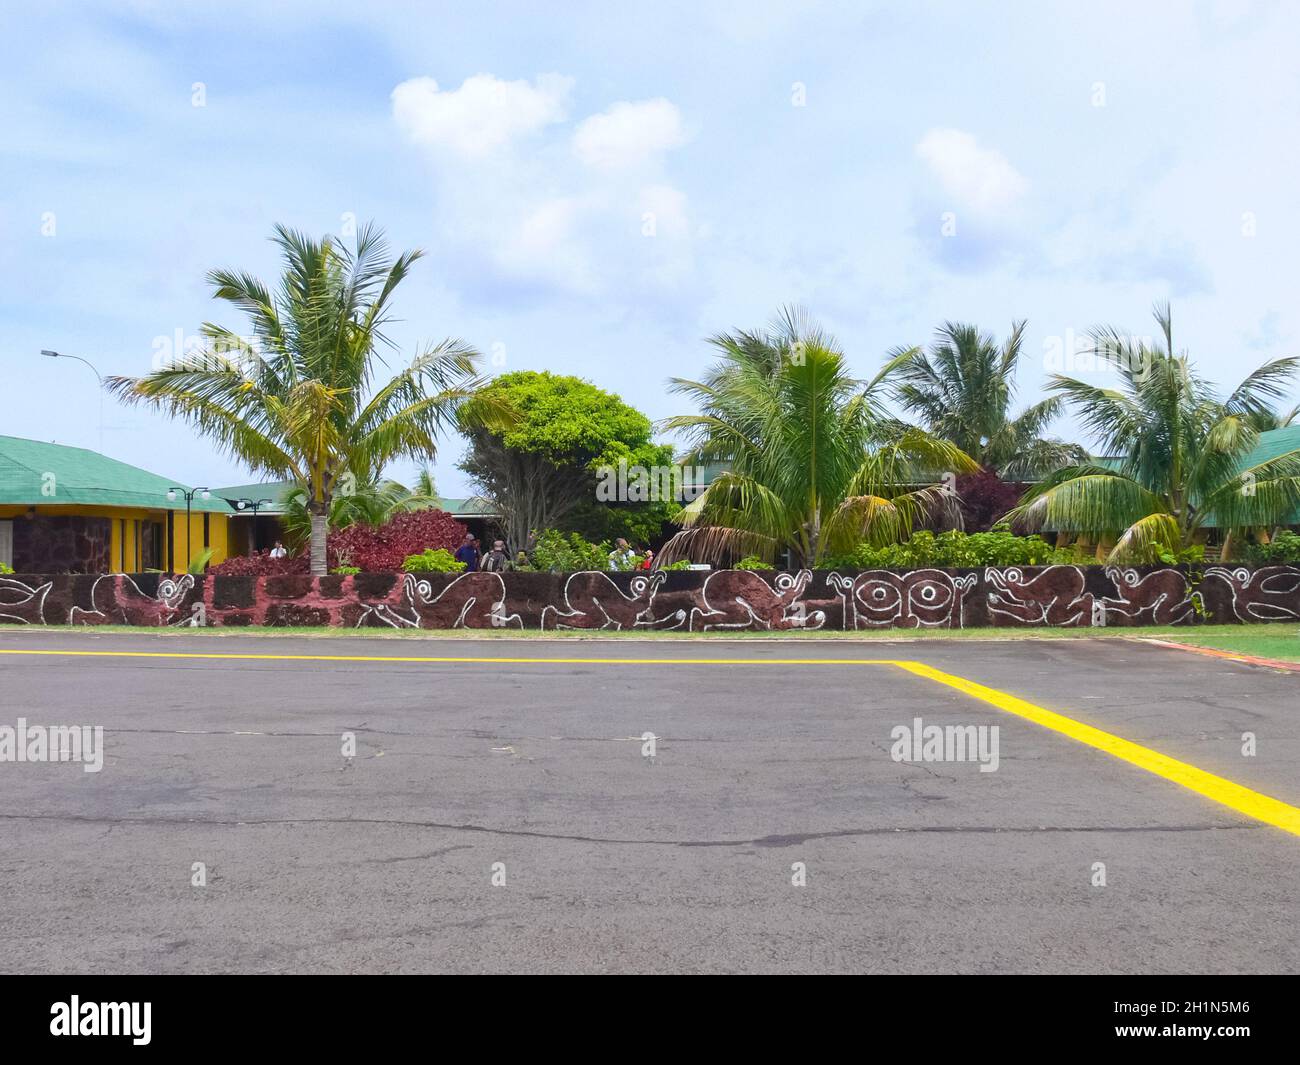 Angaroa, Easter Island, Chile - December 20, 2018: The airport on Easter Island. Airport site. Stock Photo